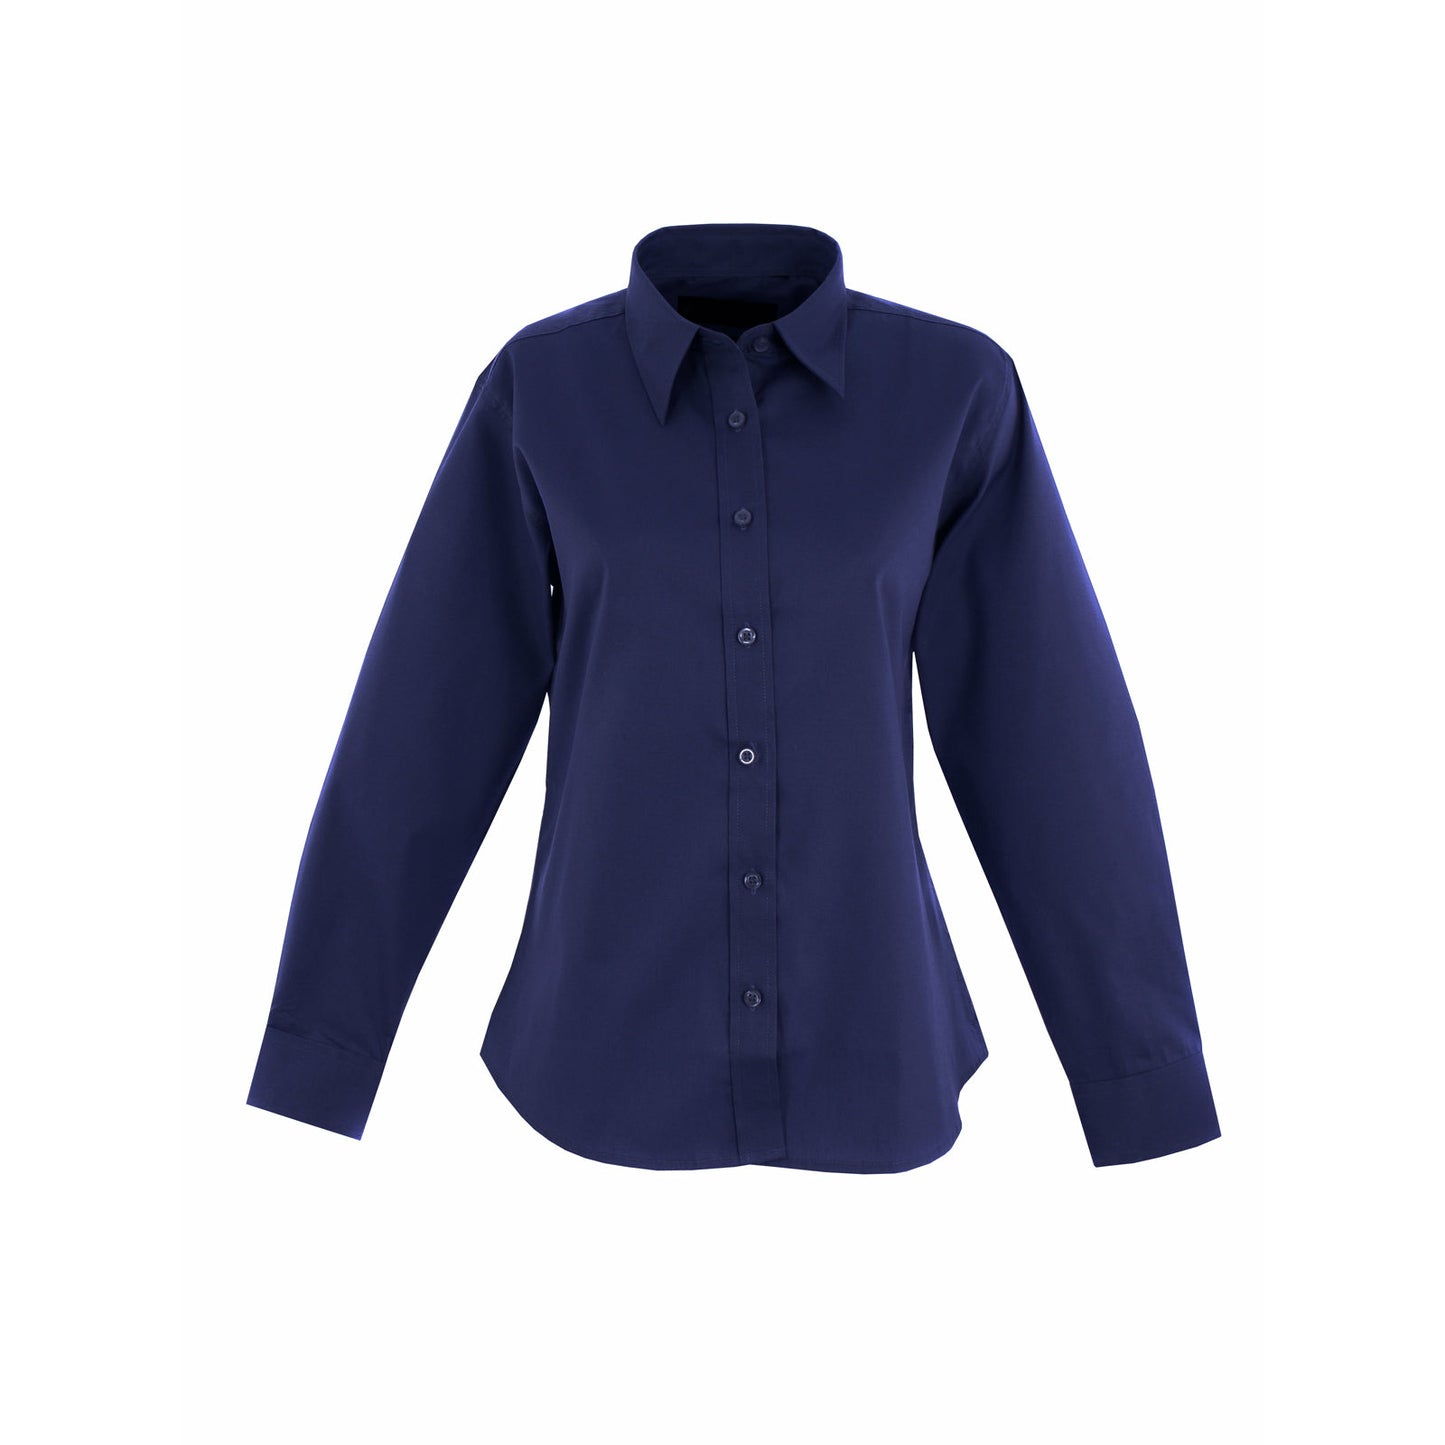 Ladies Pinpoint Oxford Full Sleeve Shirt - Navy